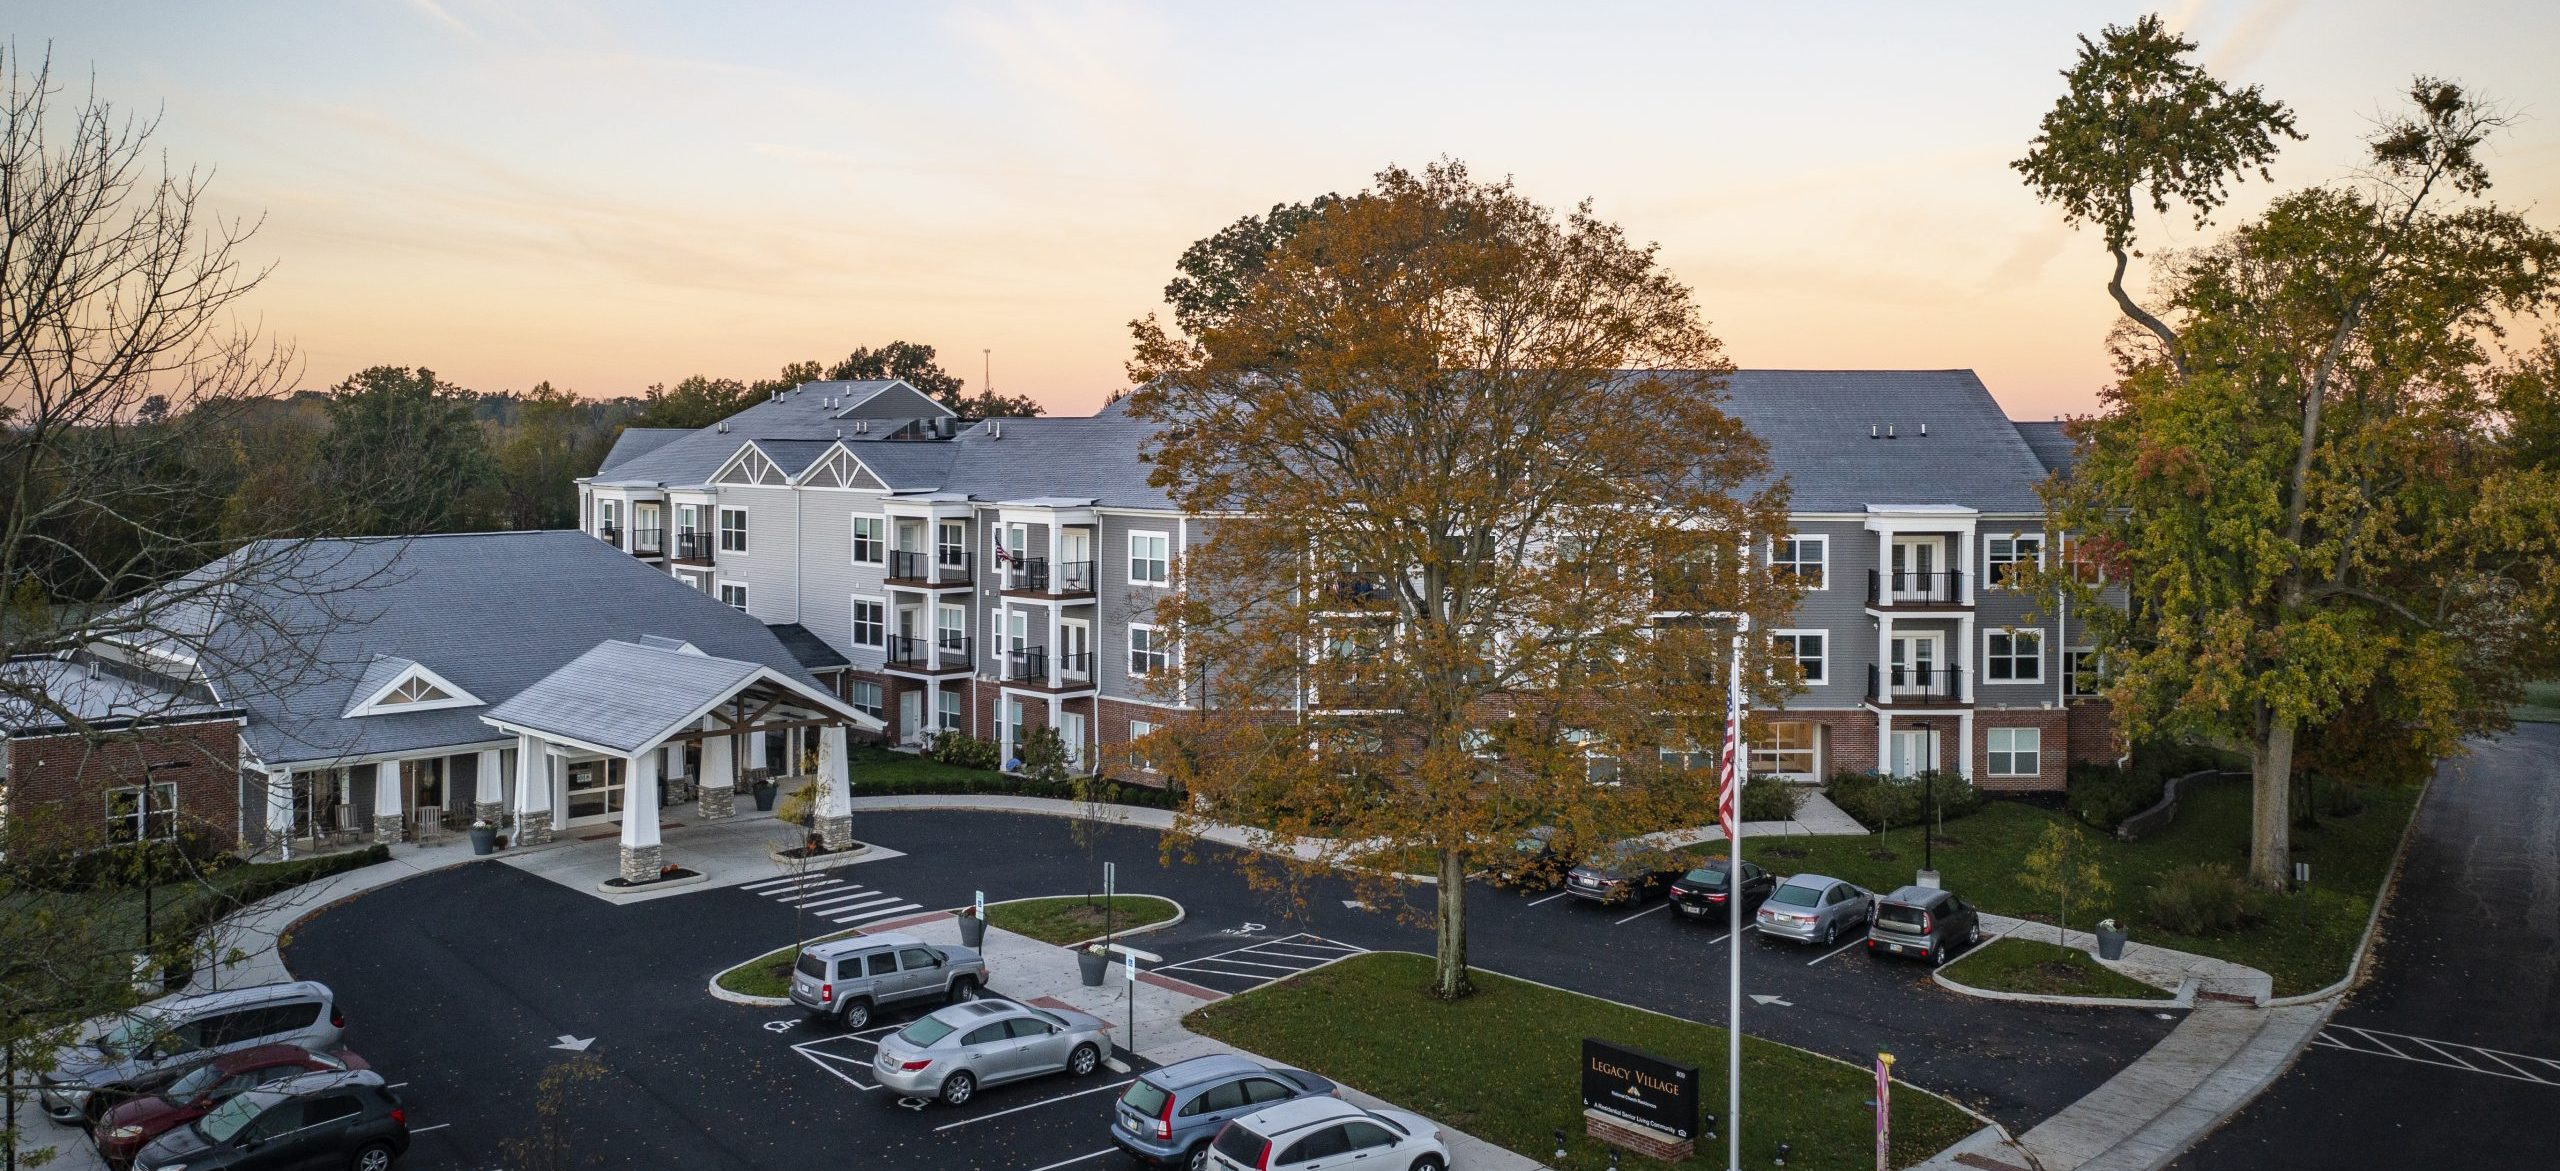 Legacy Village apartments and parking lot on a fall day